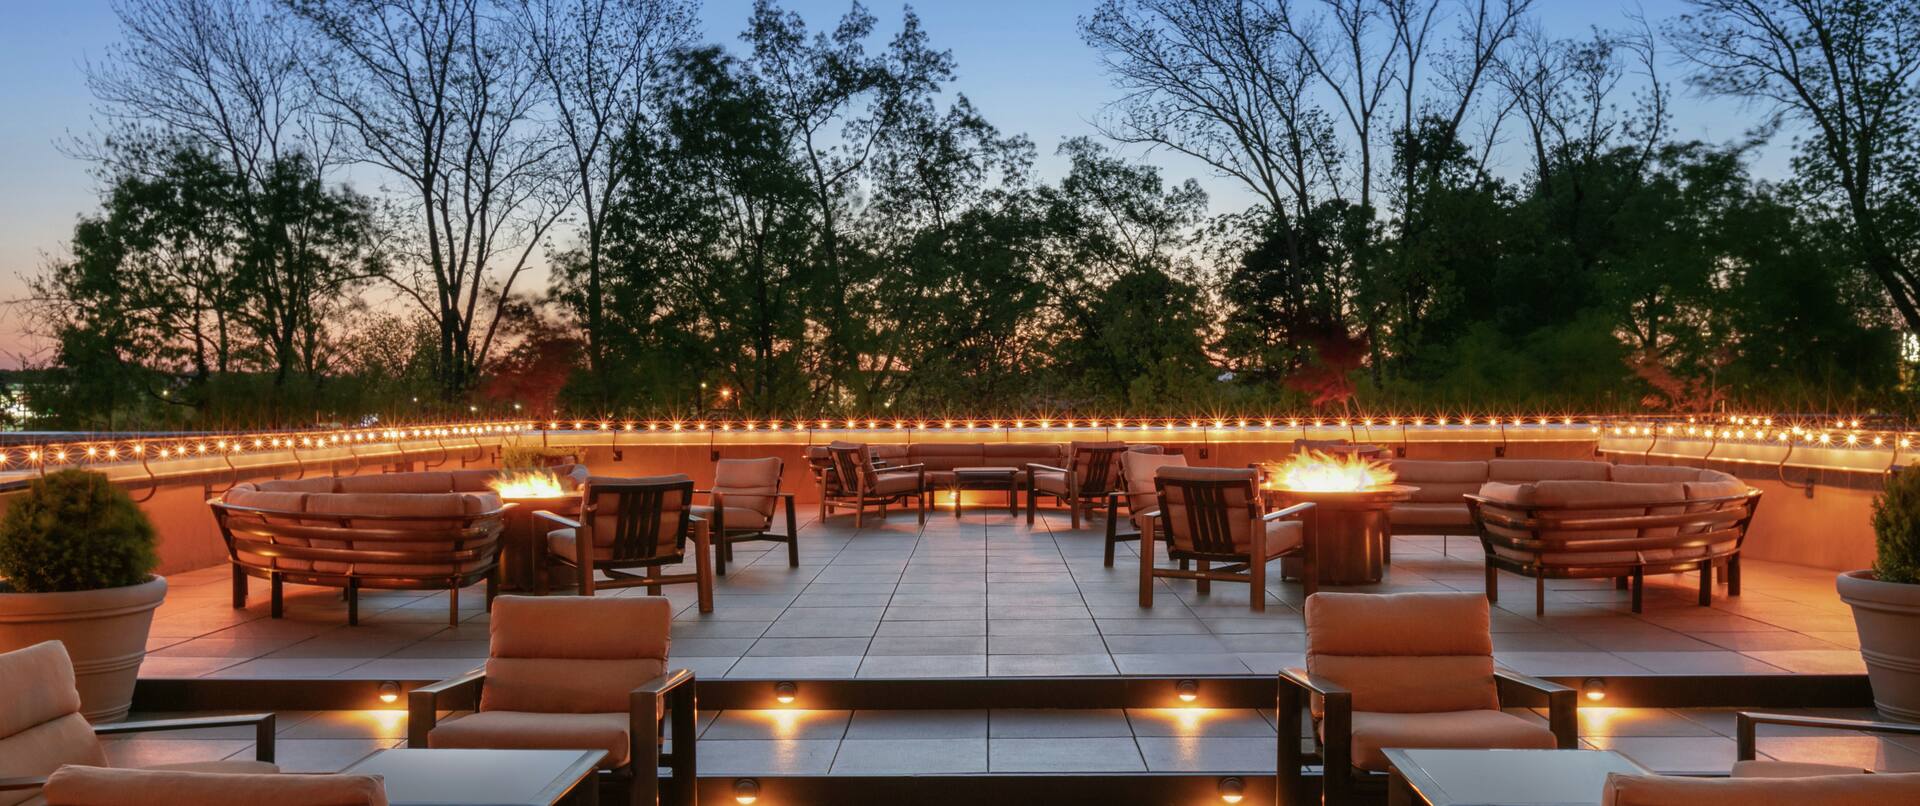 Outdoor Terrace Seating